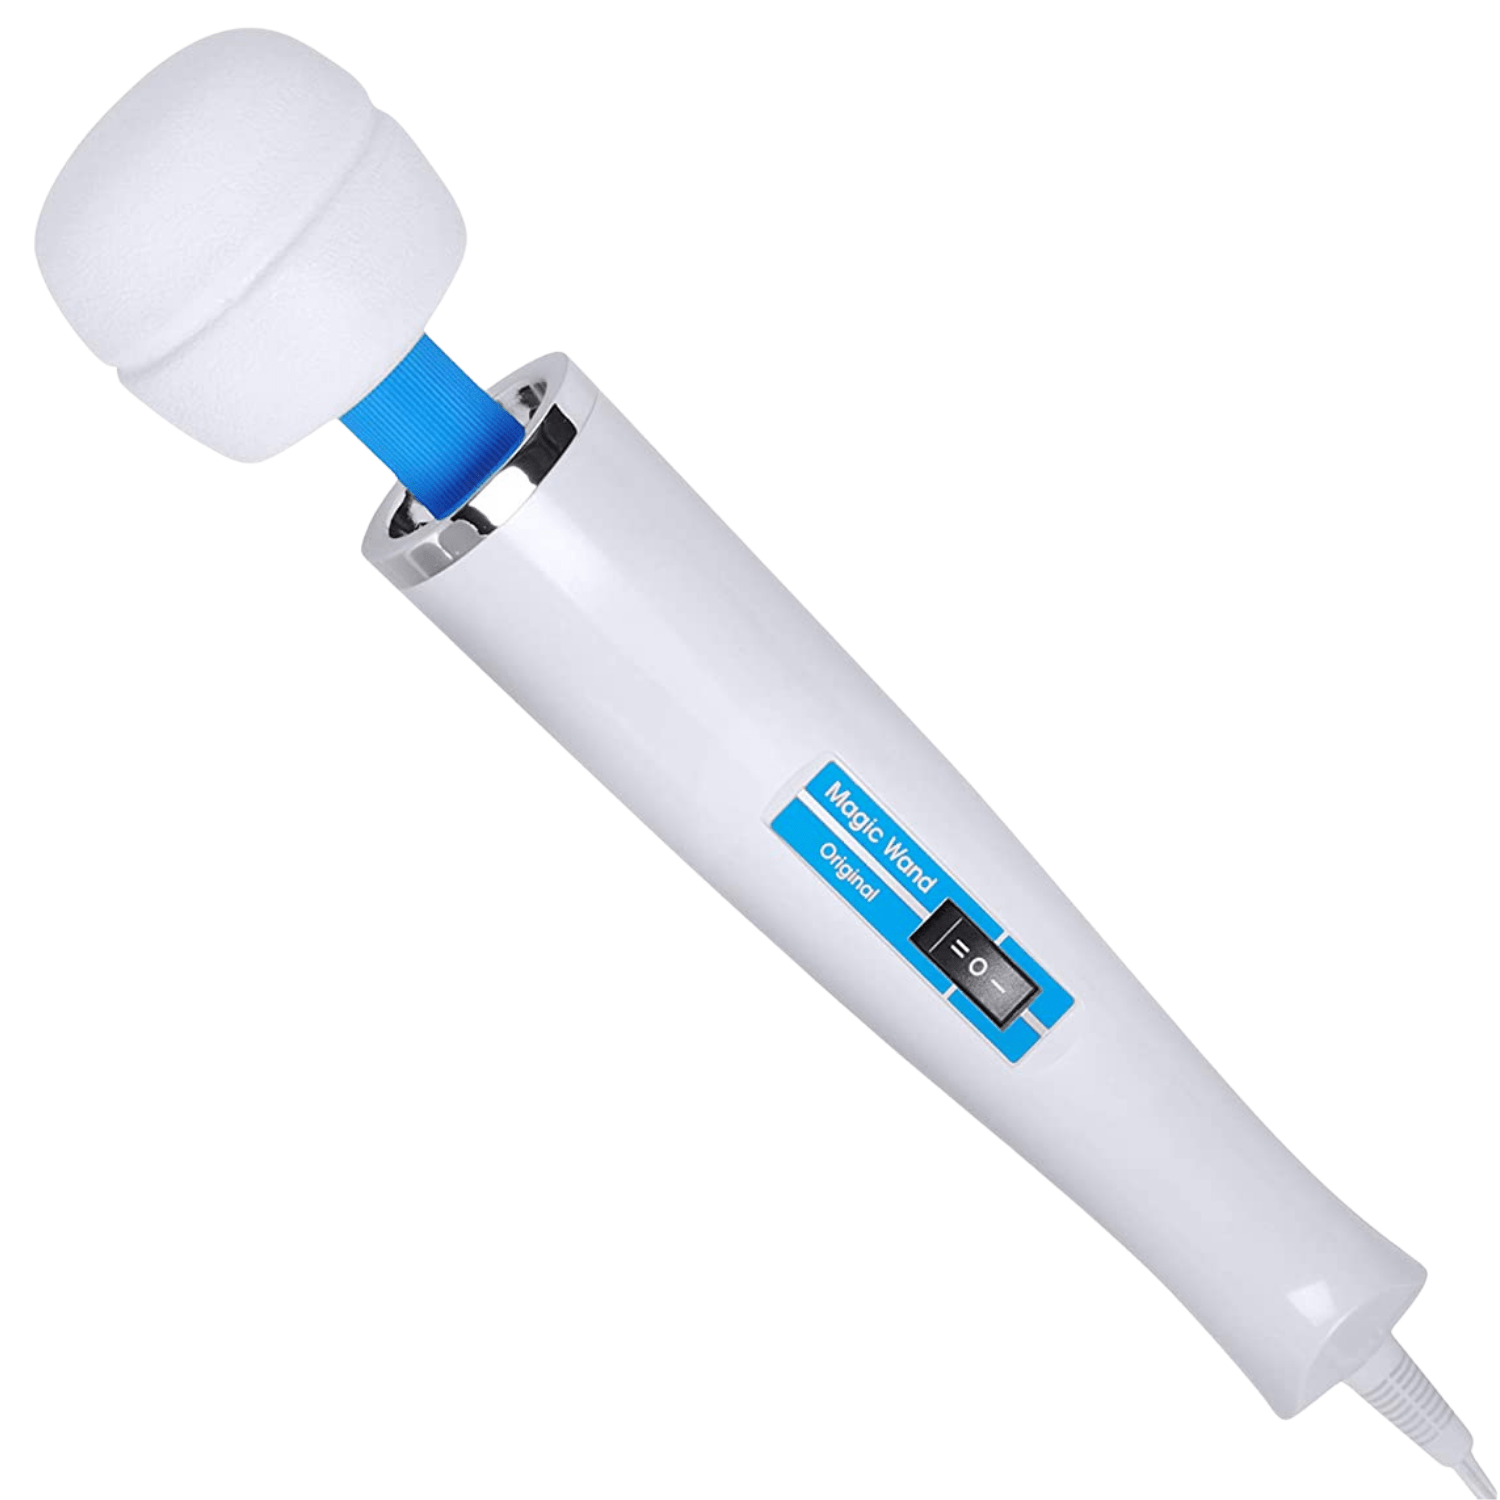 The Original Magic Wand Massager by Vibratex - #1 Clitoral Wand On The Internet!-BestGSpot